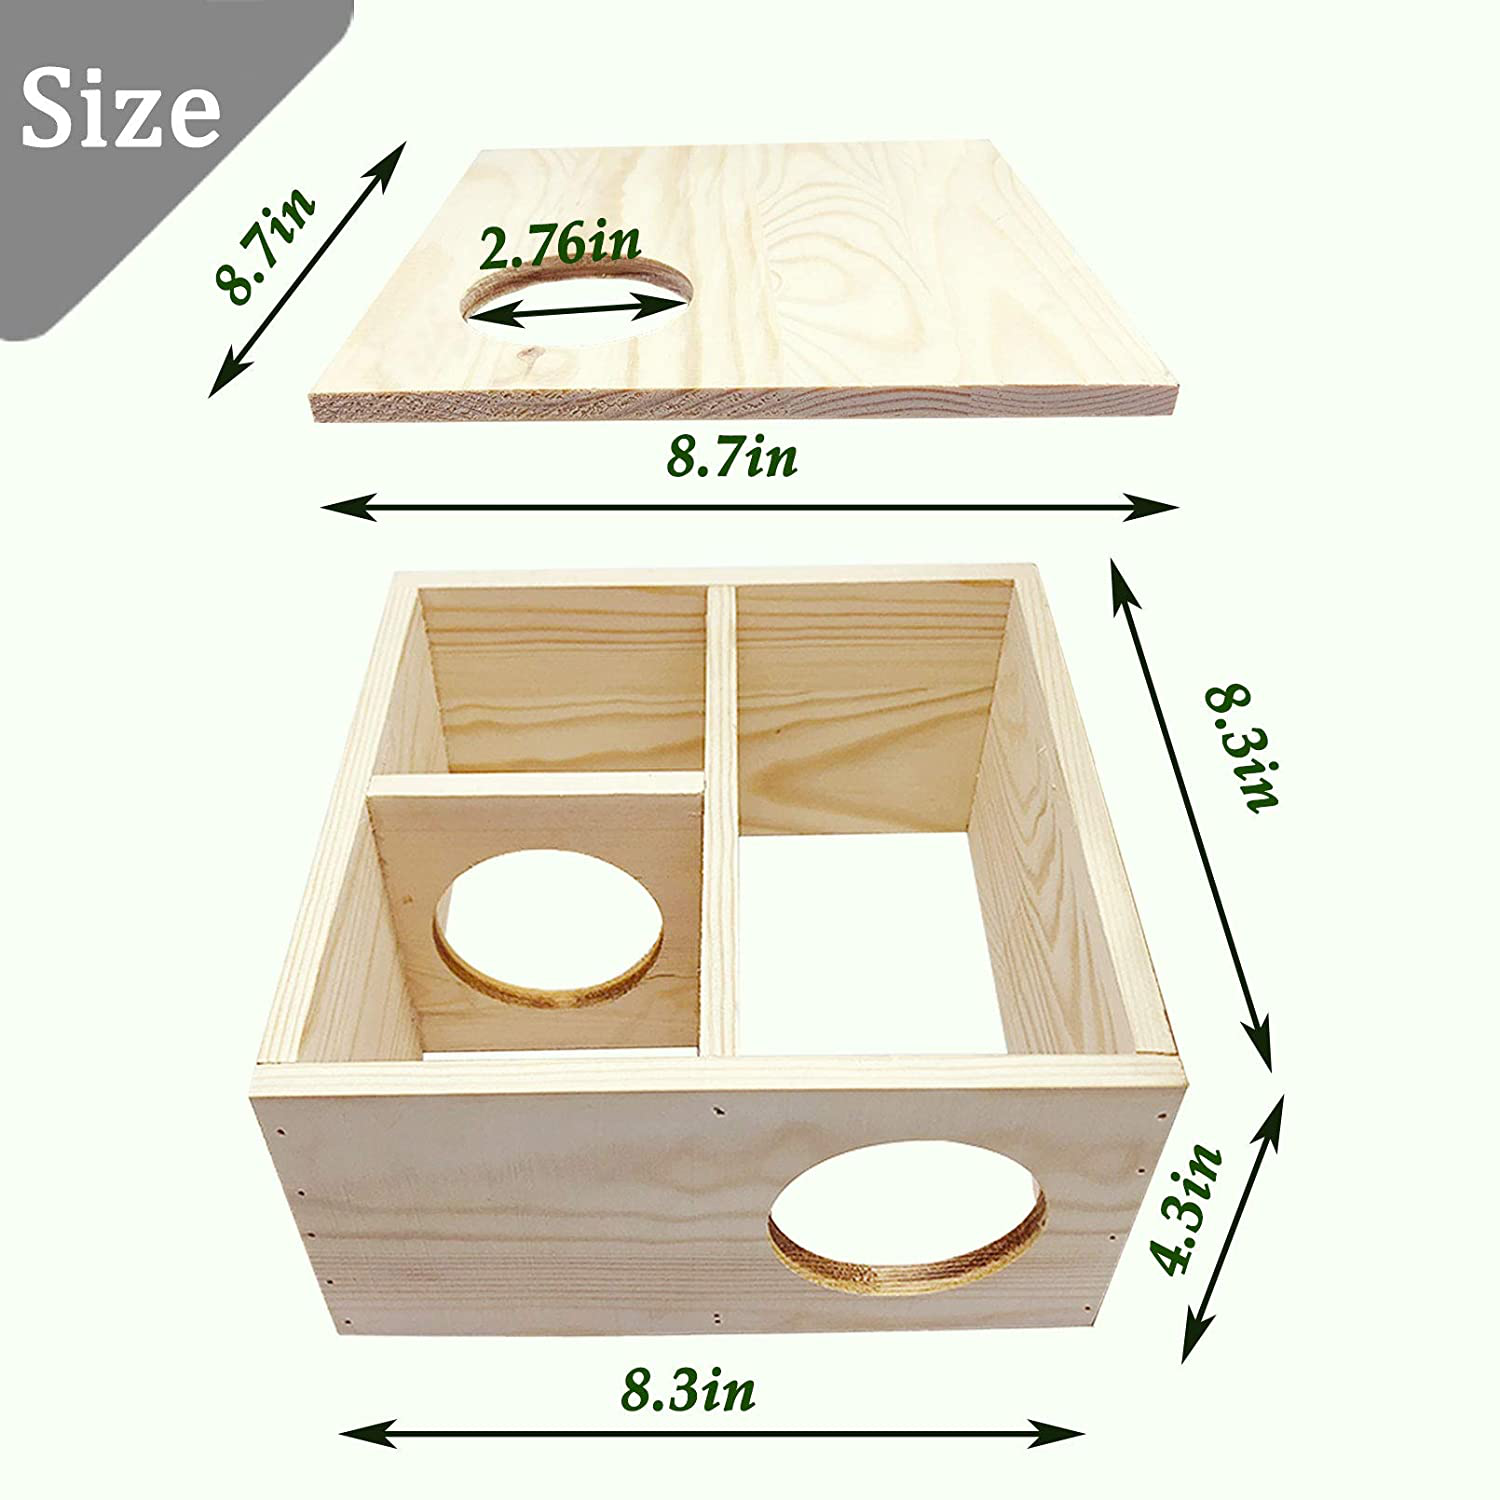 Tfwadmx Multi-Chamber Hamster House Maze Multi-Room Pine Wooden Hideouts Resting Platform Hut Exploring Tunnel Toys Habitats Decor for Mice, Gerbils, Gerbils, Mouse, Lemmings and Other Small Rodents